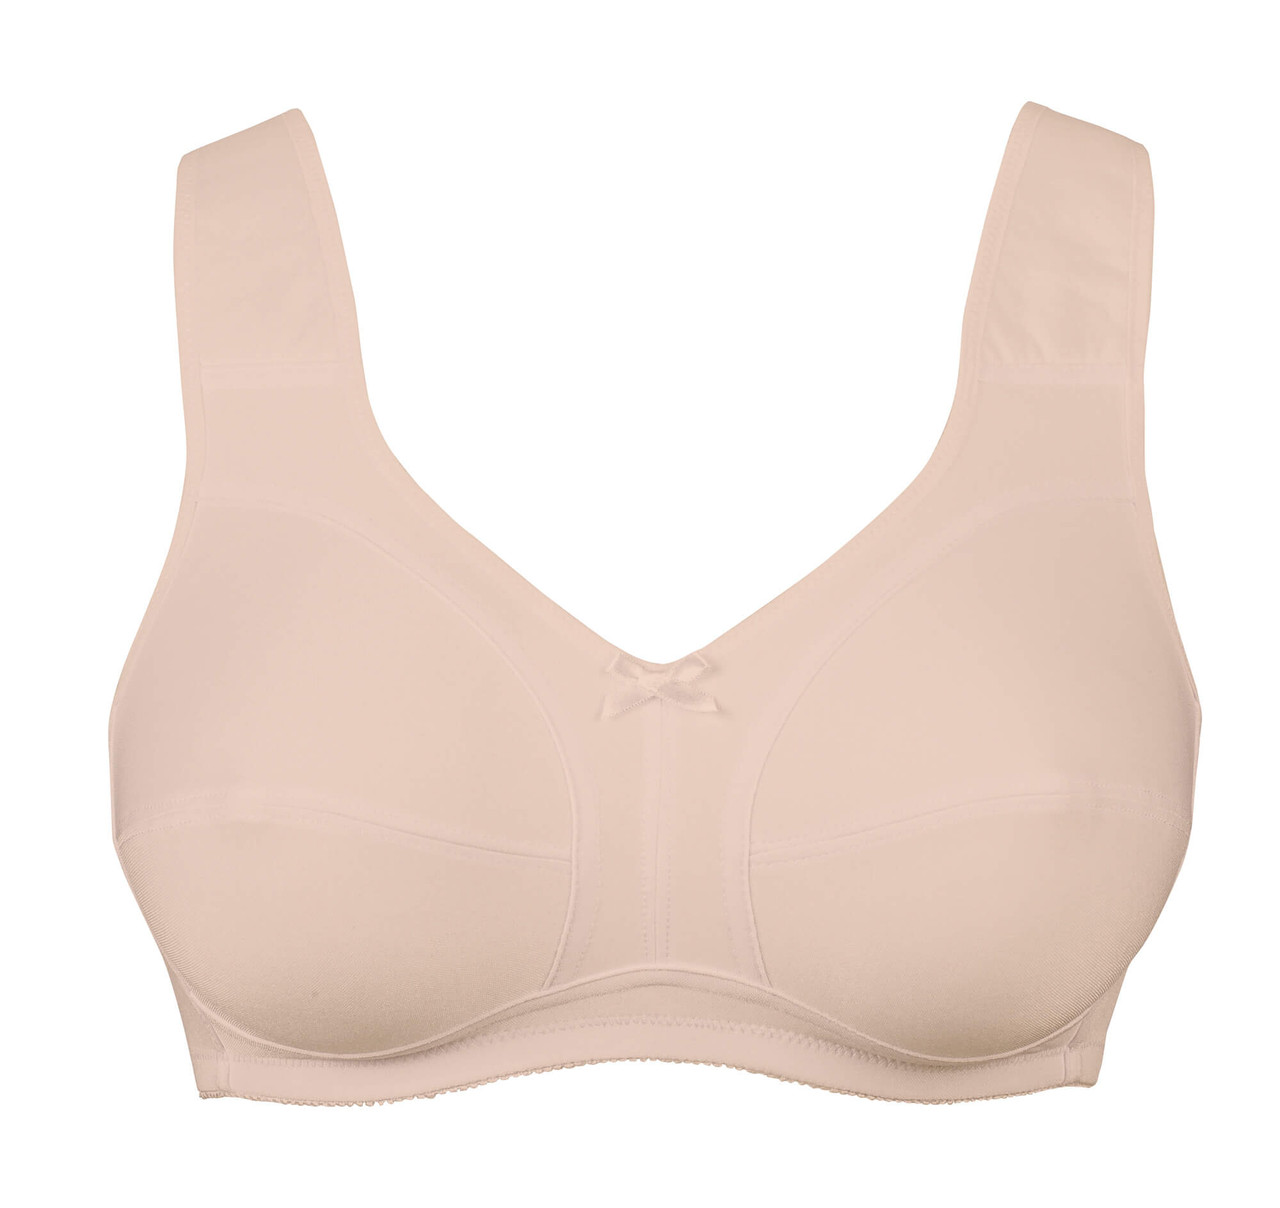 Naturana Women's Soft Cup Everyday Bra 86545 White 44b for sale online